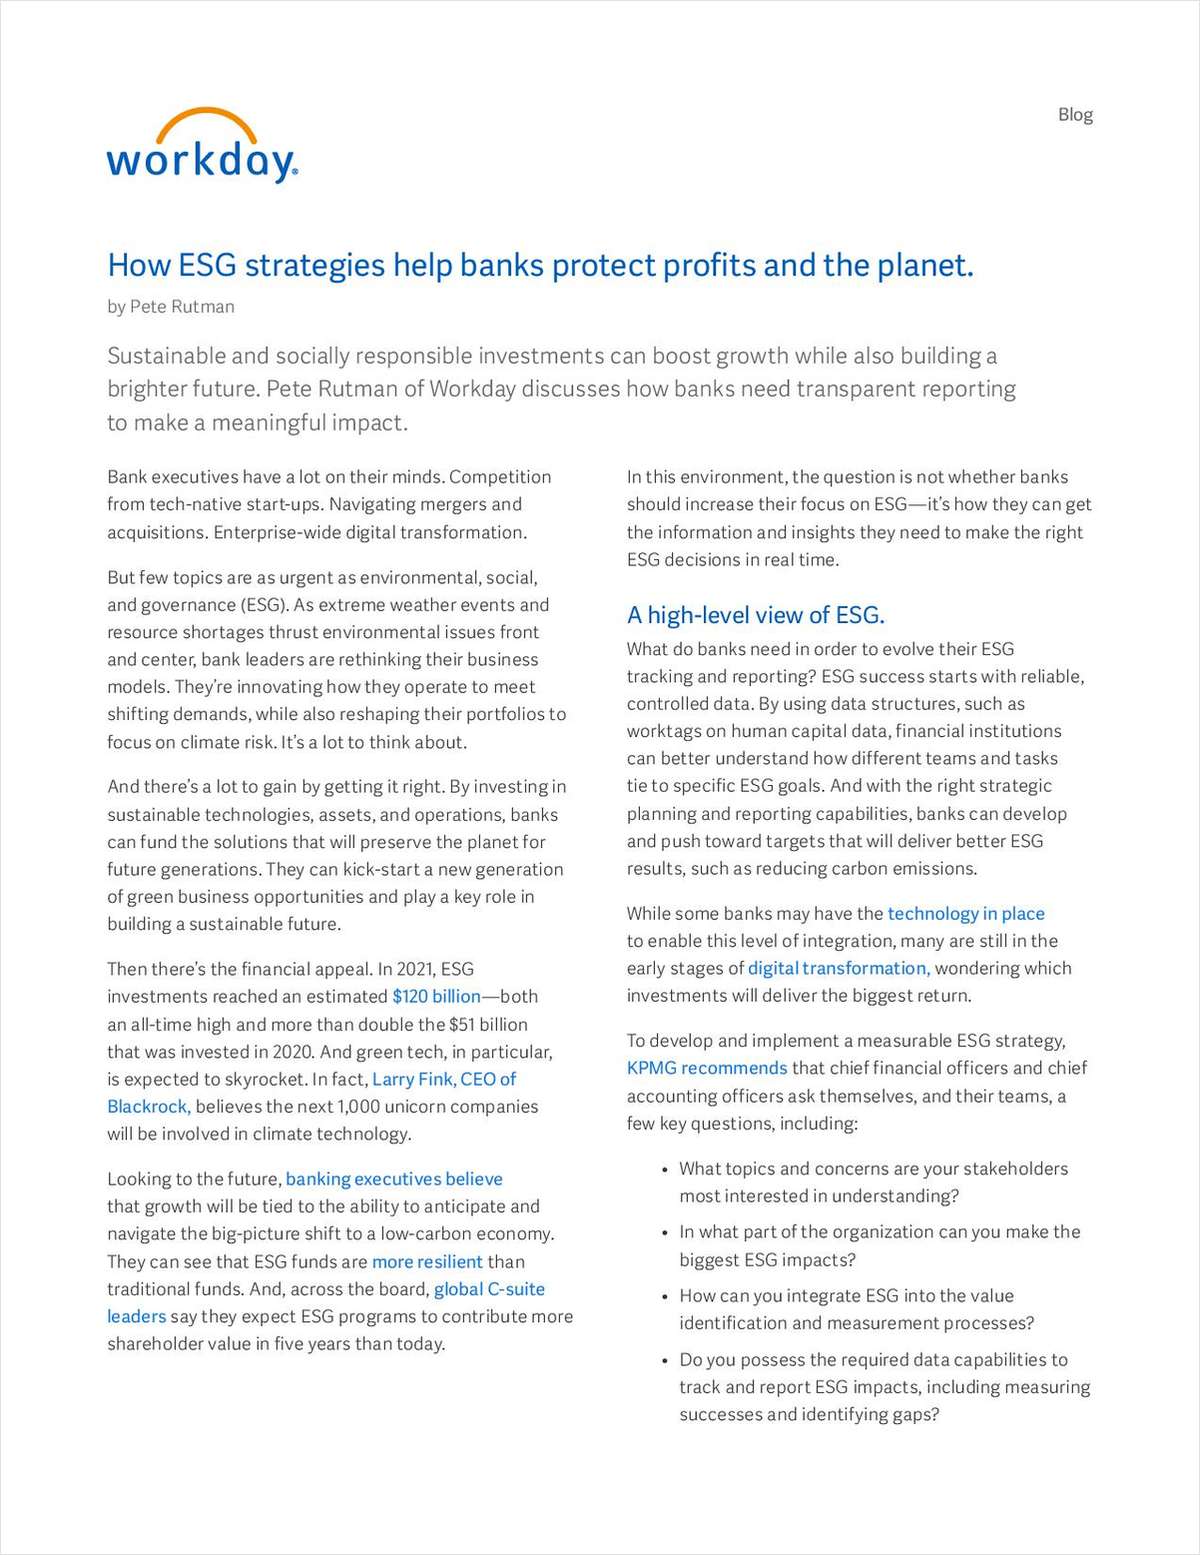 Workday's Whitepaper: How ESG strategies help banks protect profits and the planet.